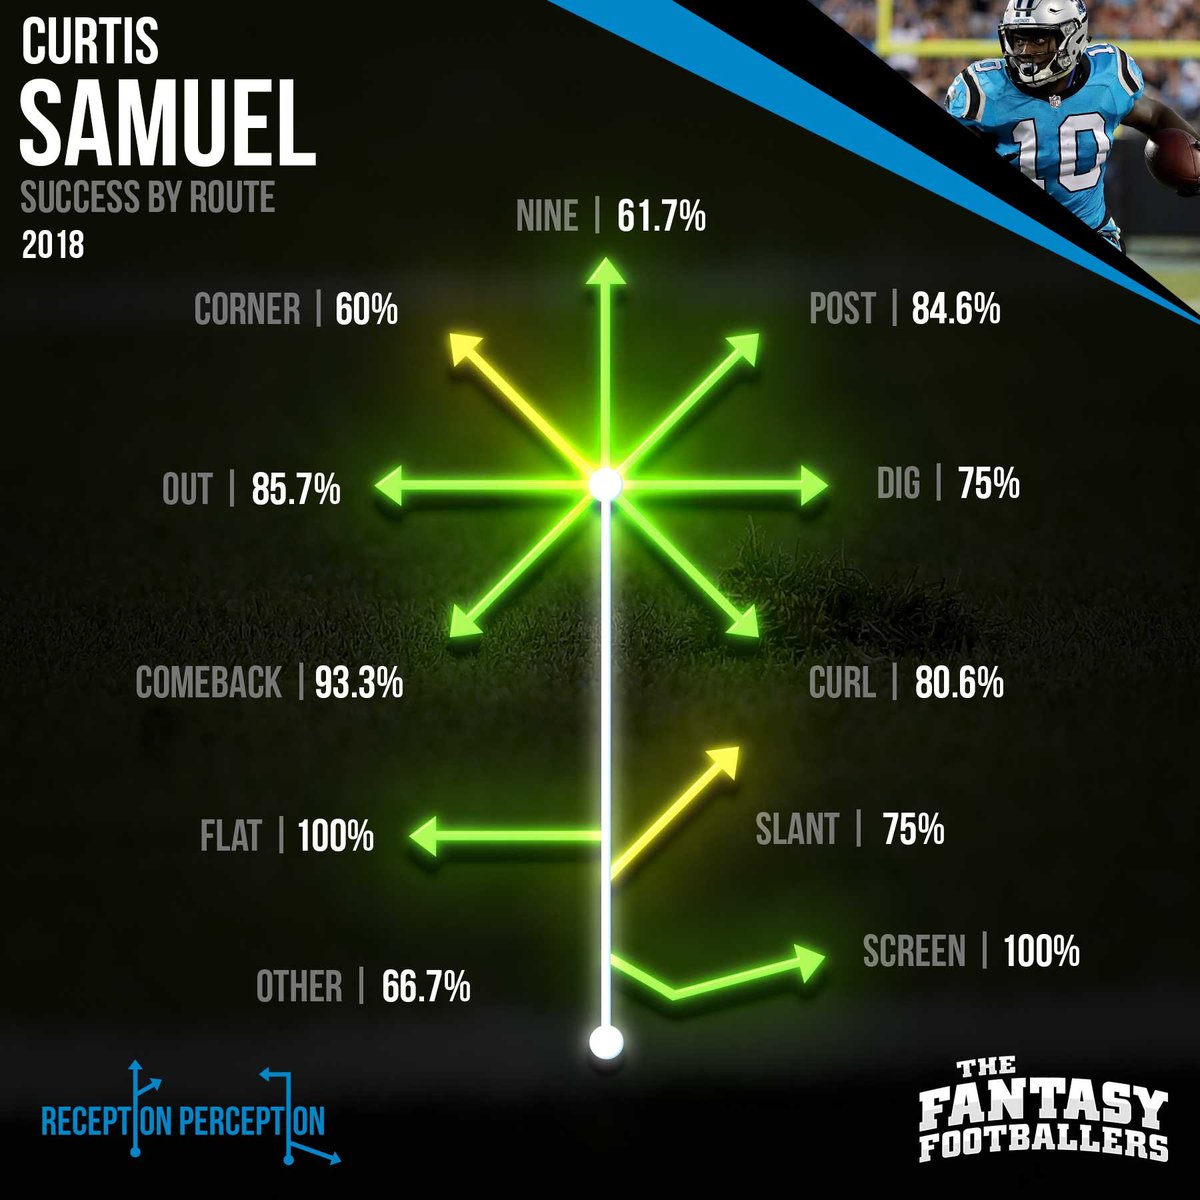 I am of the belief that Samuel is not the culprit here.  @MattHarmon_BYB 's  #receptionperception shows that Samuel was consistently winning on his routes for the past two years.